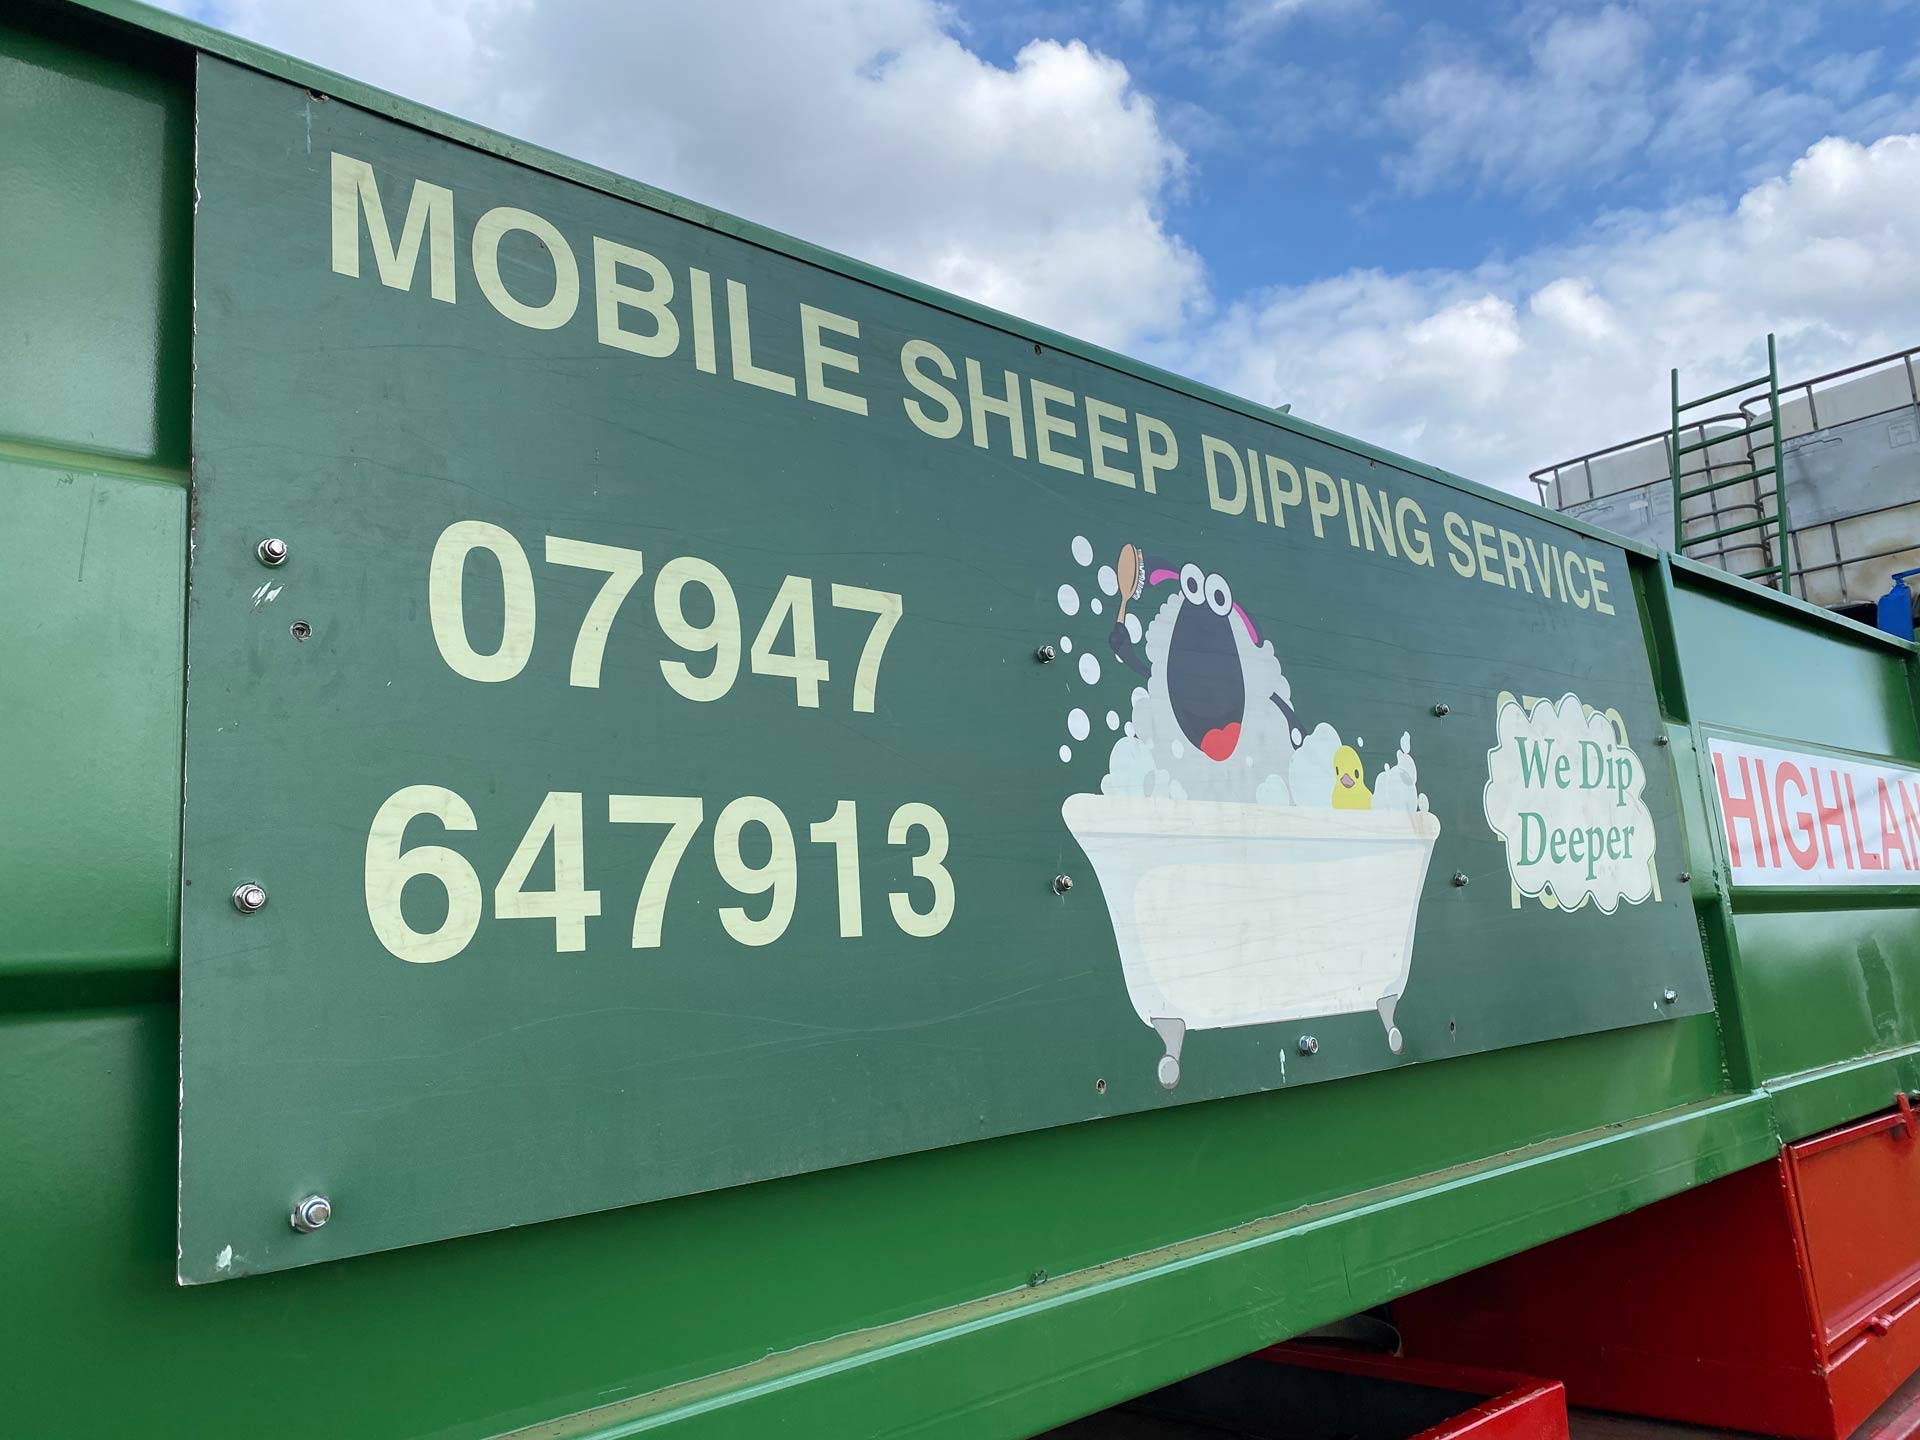 Gallery | Mobile Sheep Dipping